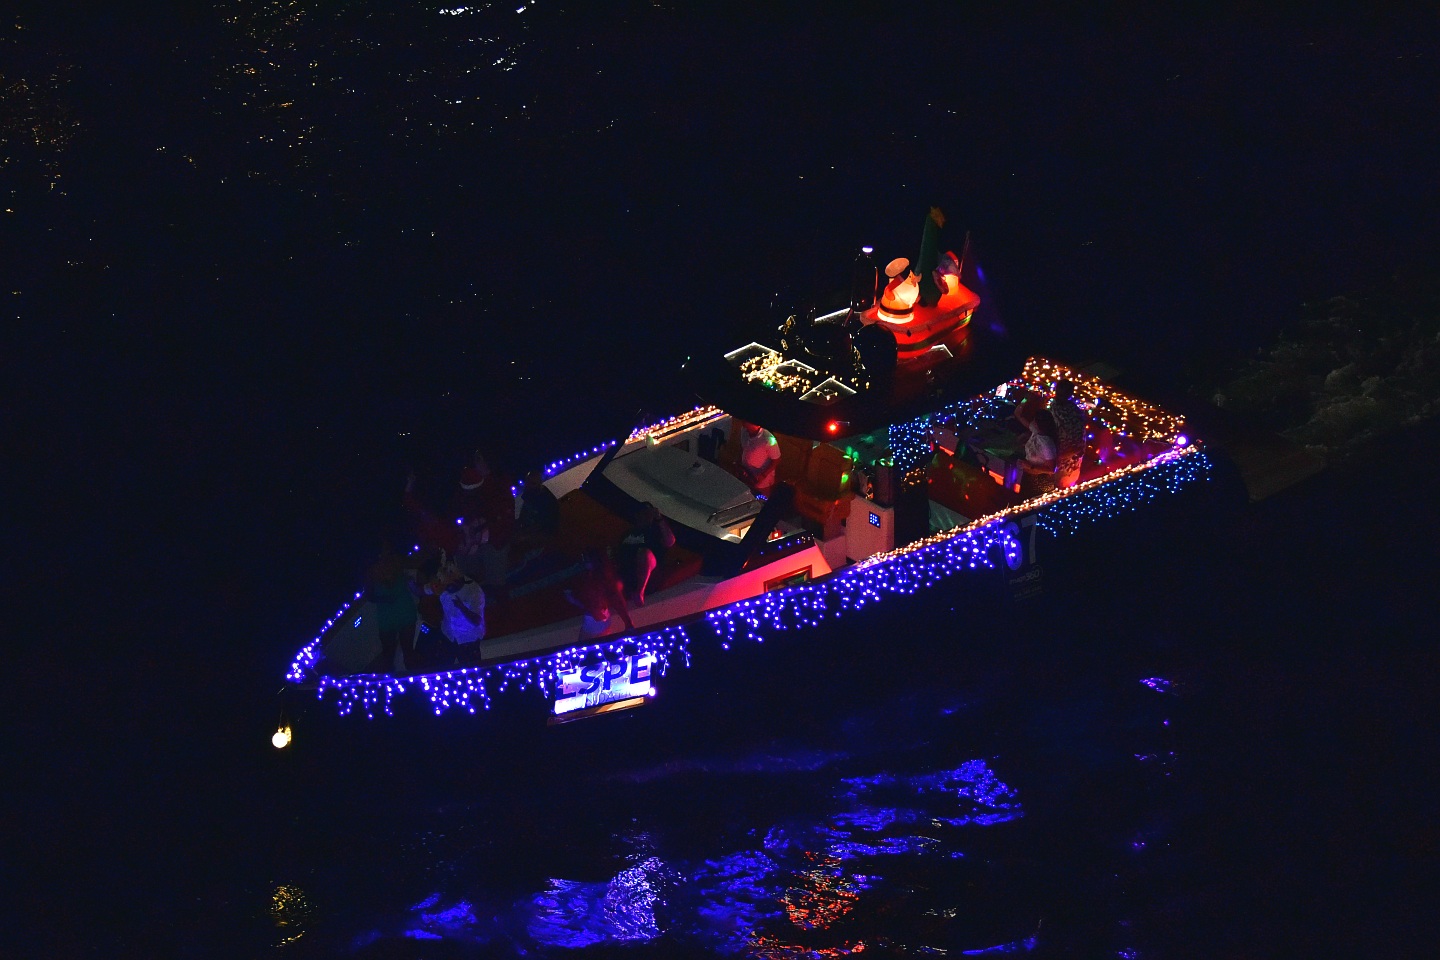 ESPE Foundation on board Epic, boat number 67 in the 2021 Winterfest Boat Parade